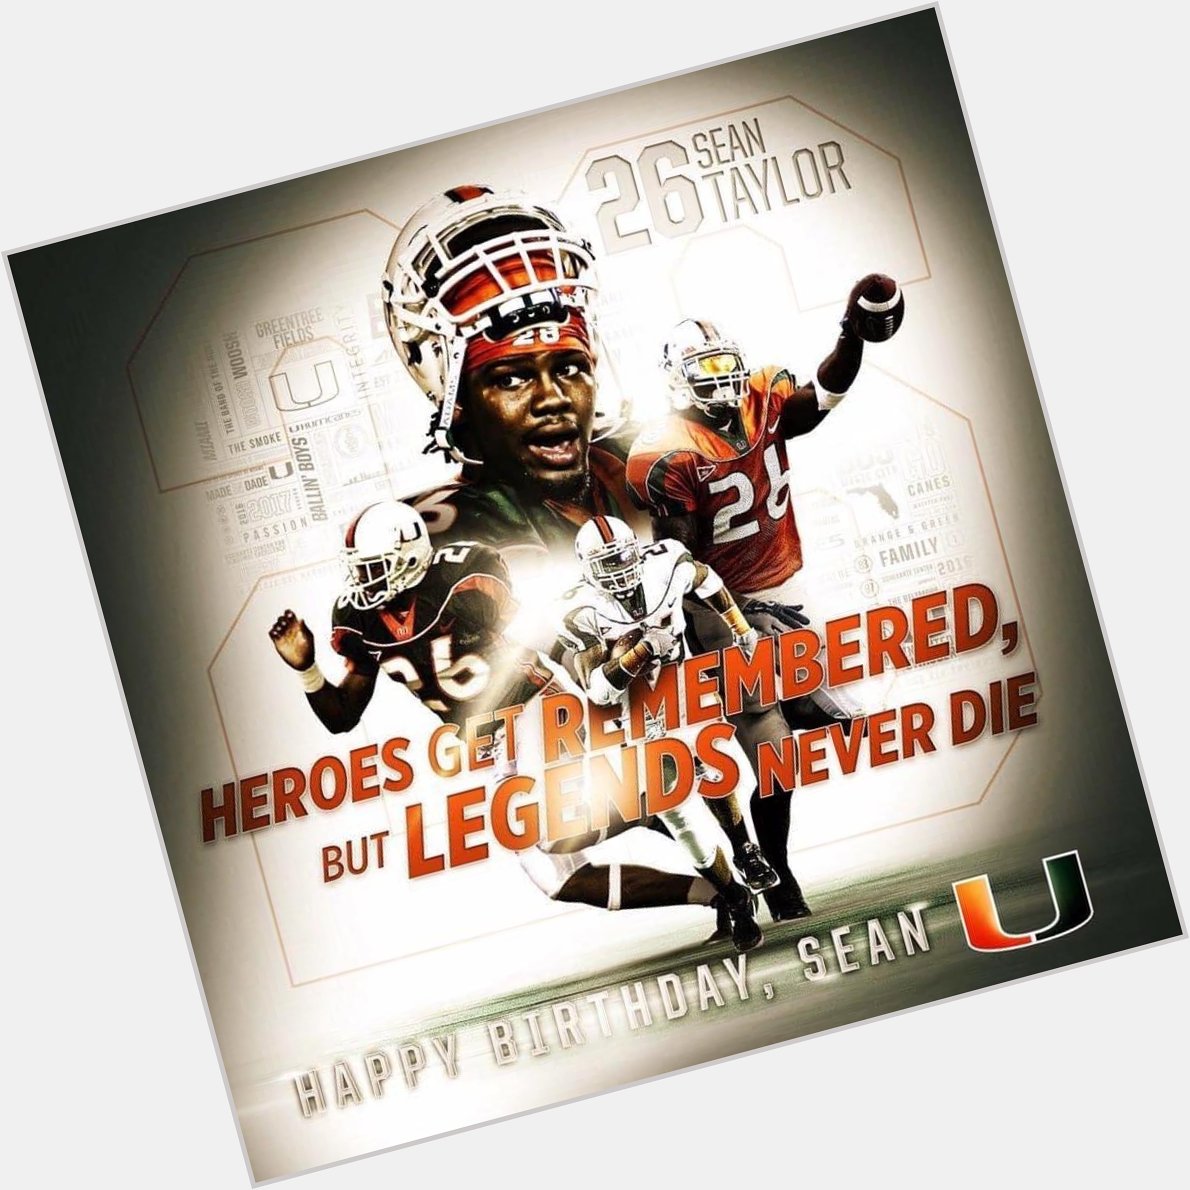 Happy Birthday Sean Taylor He played hard every down  Sean Taylor  